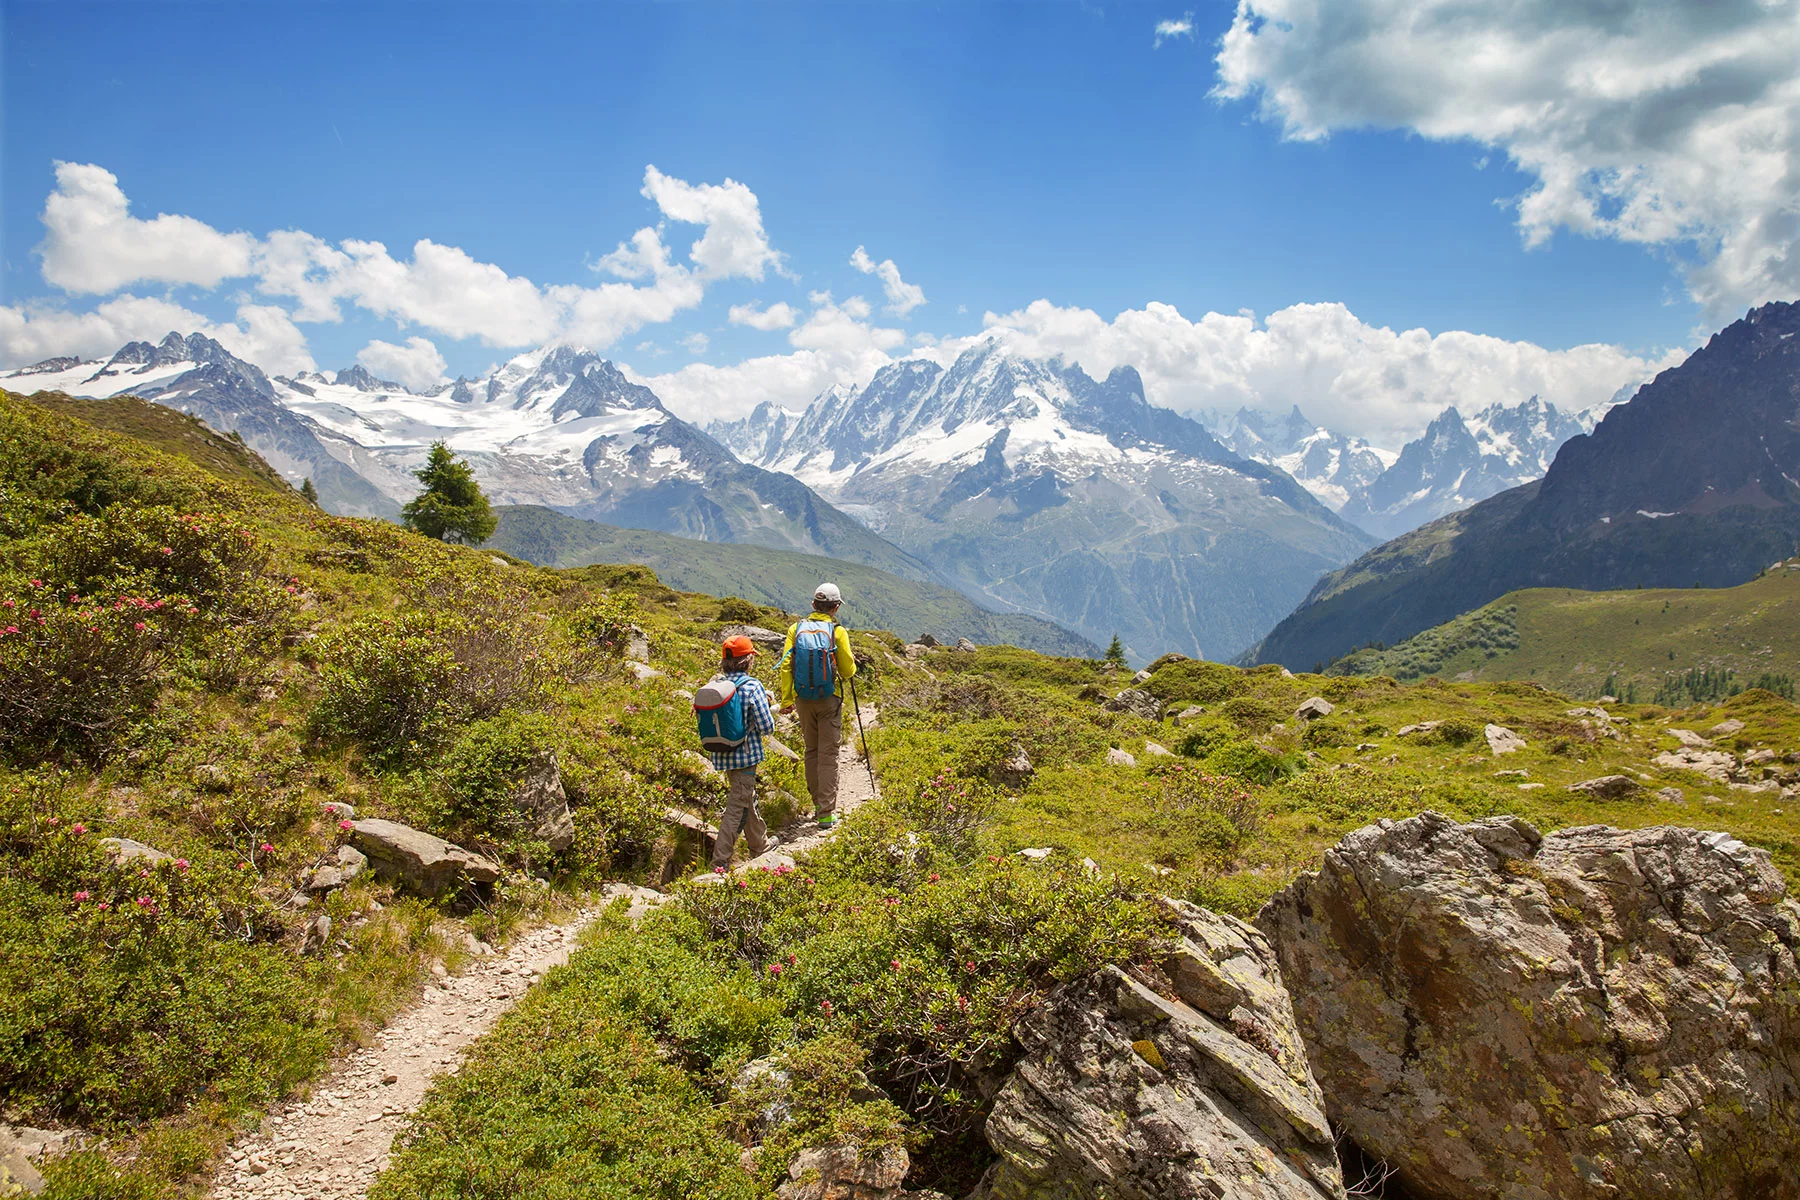 A family hike in the Swiss Alps